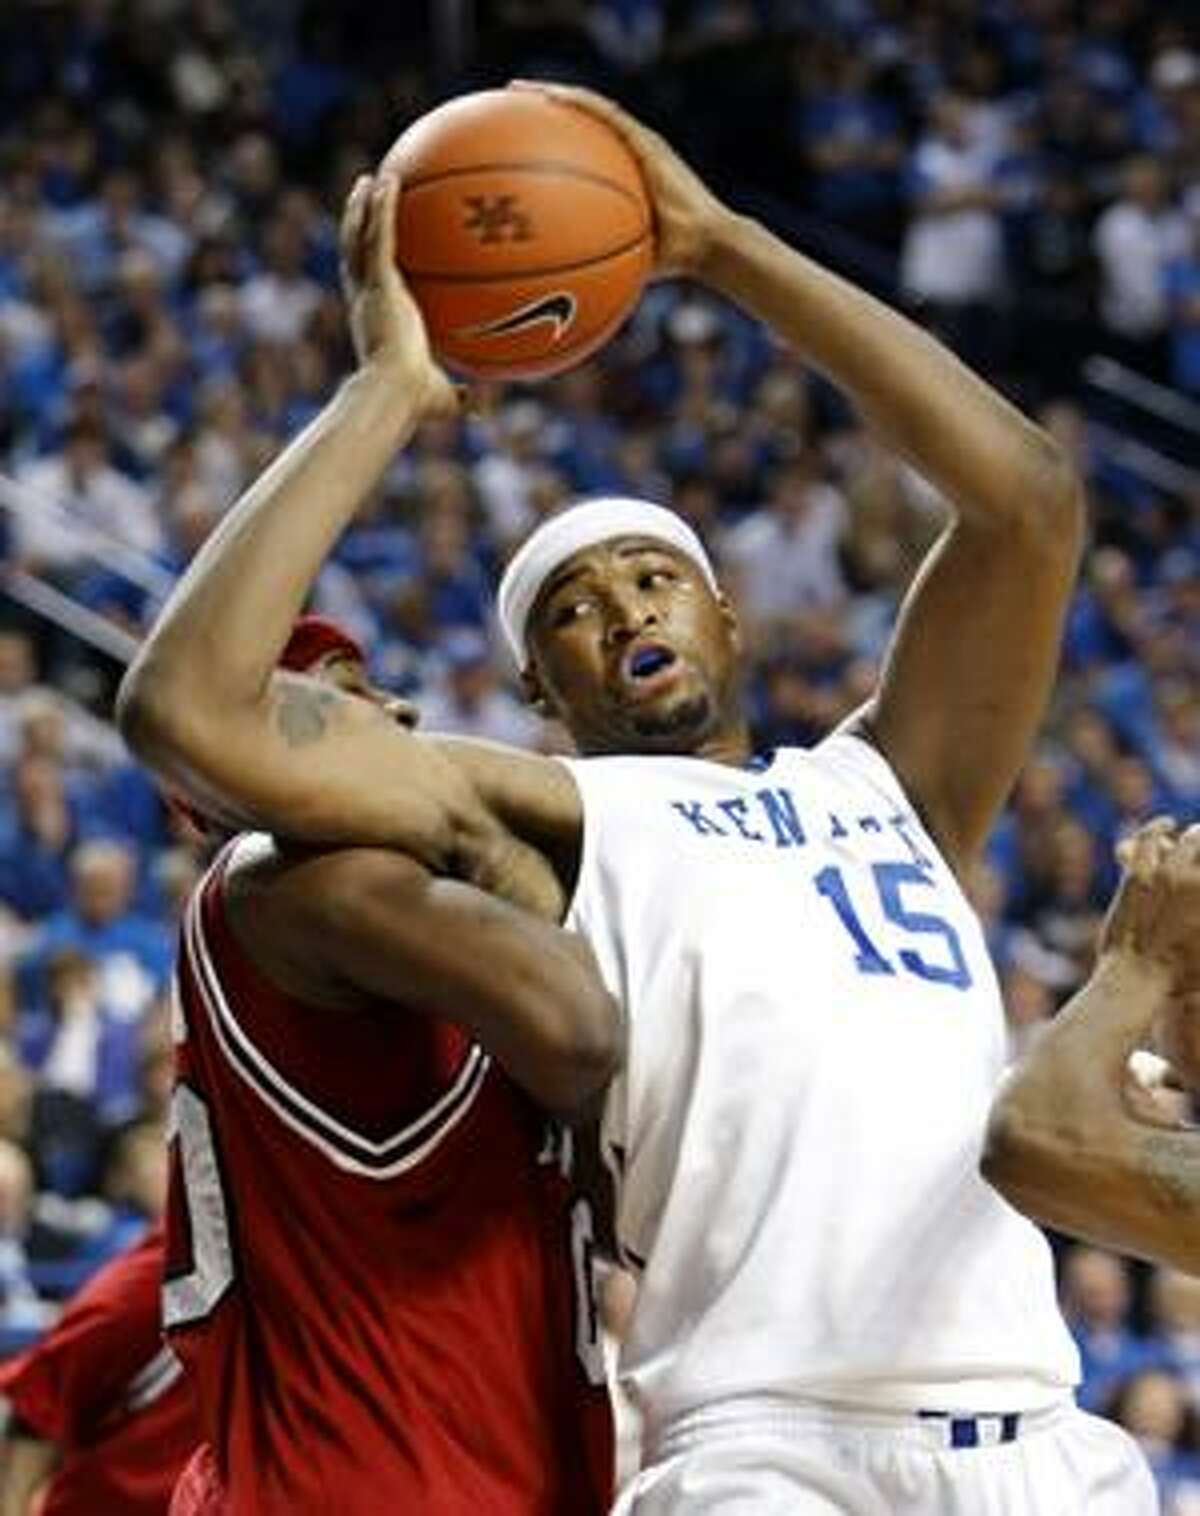 Kentucky's DeMarcus Cousins tries to move around Arkansas's Mike Washington during the first half Saturday in Lexington, Ky.